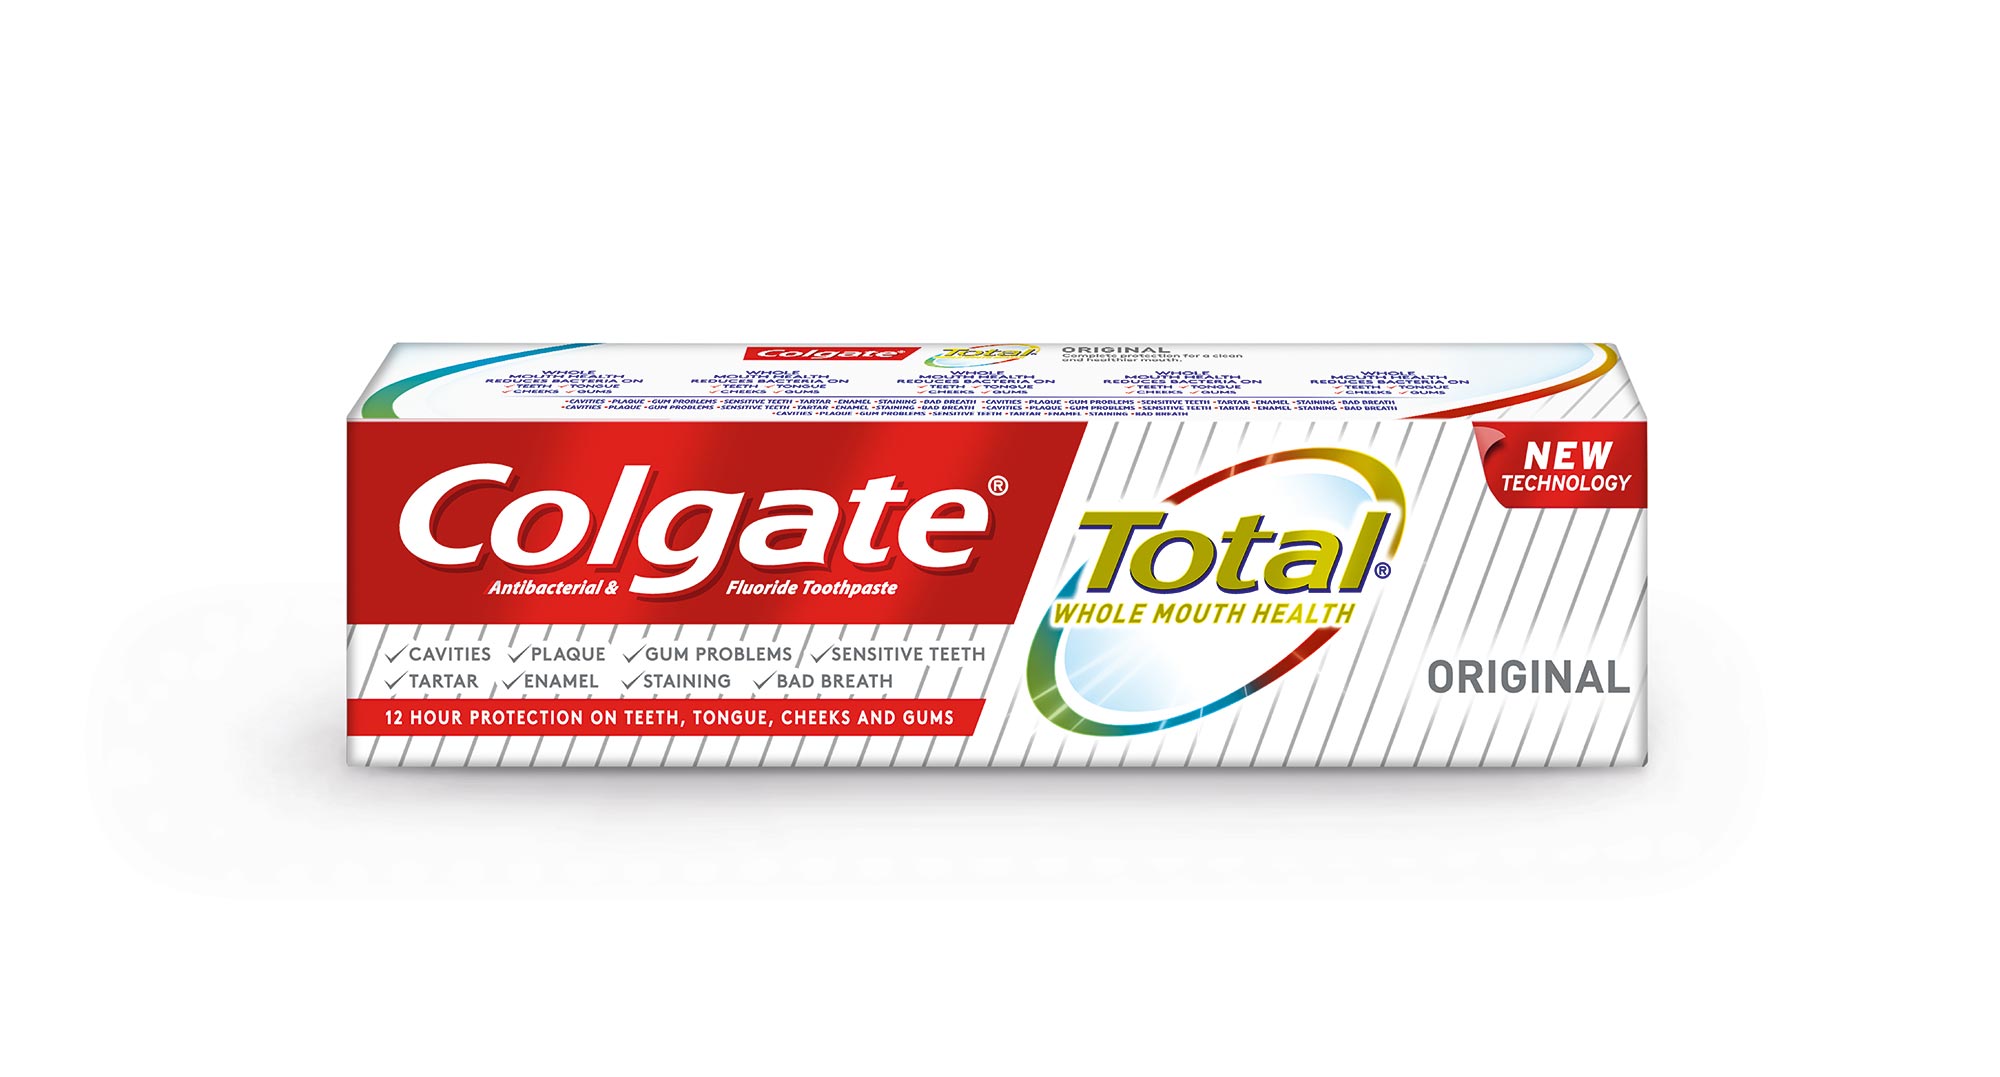 New Colgate Total toothpaste promotes whole mouth health